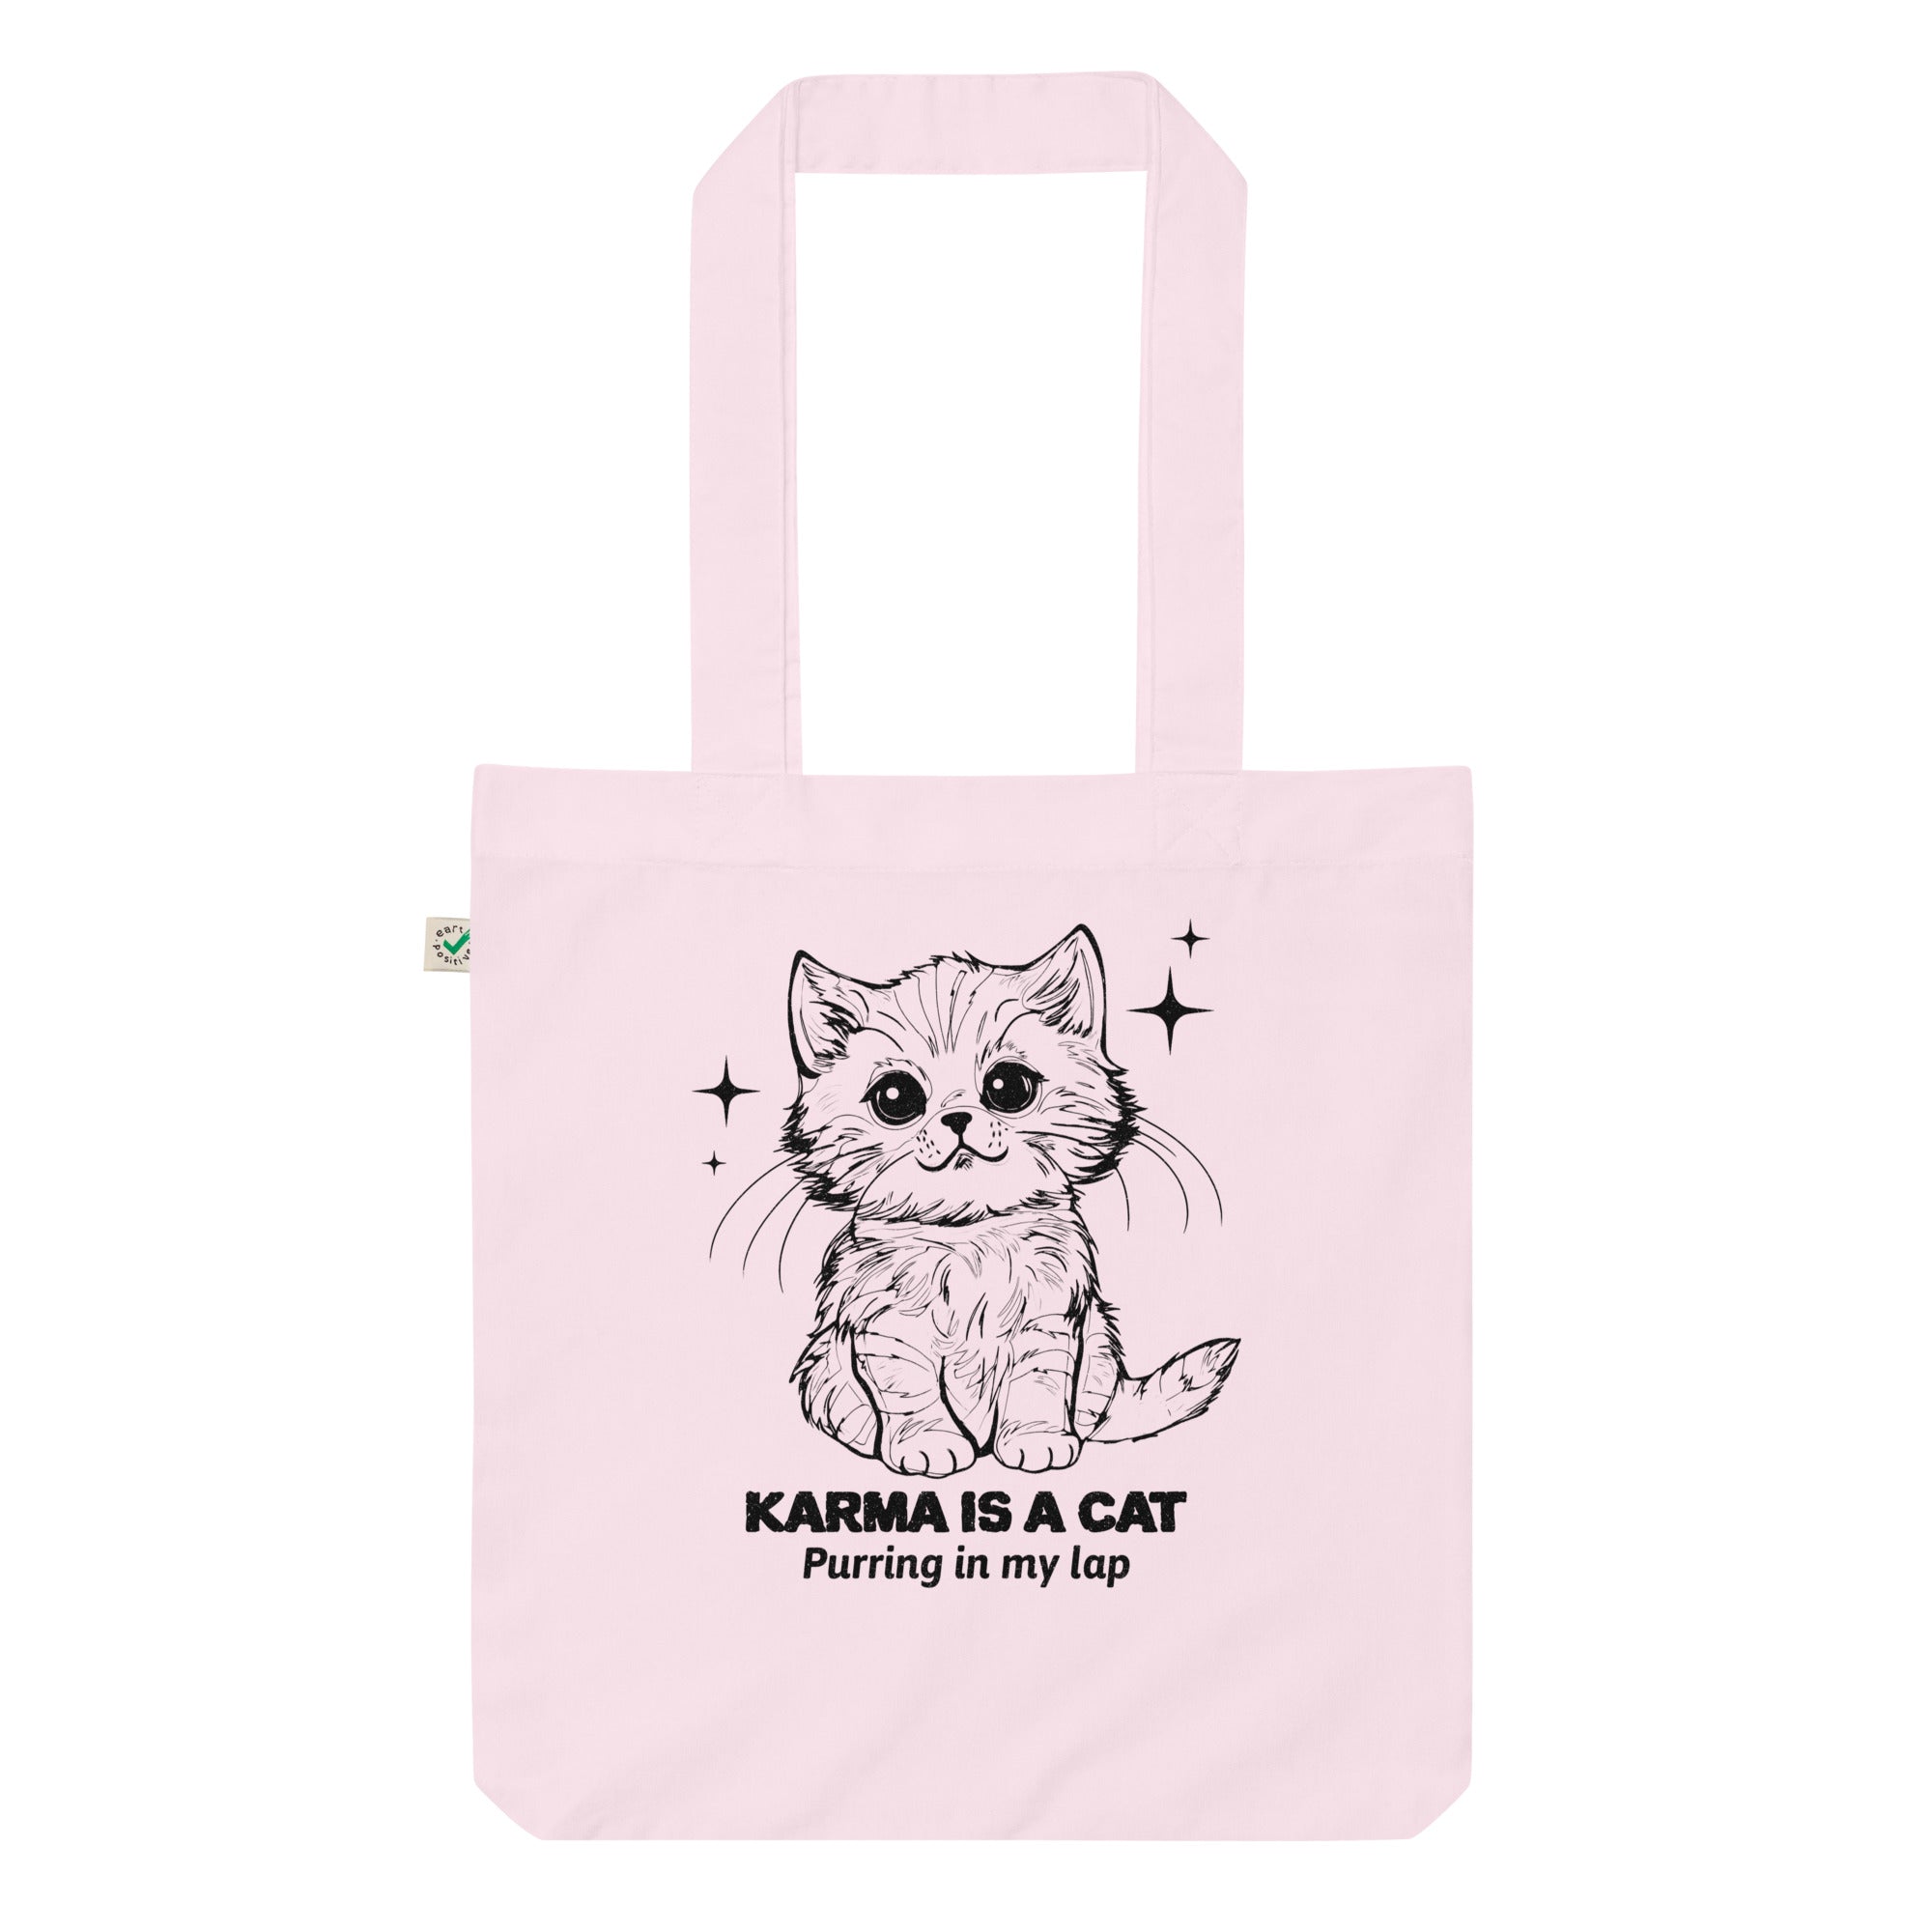 Karma Is A Cat Purring In My Lap Vintage Style Printed Organic fashion tote bag